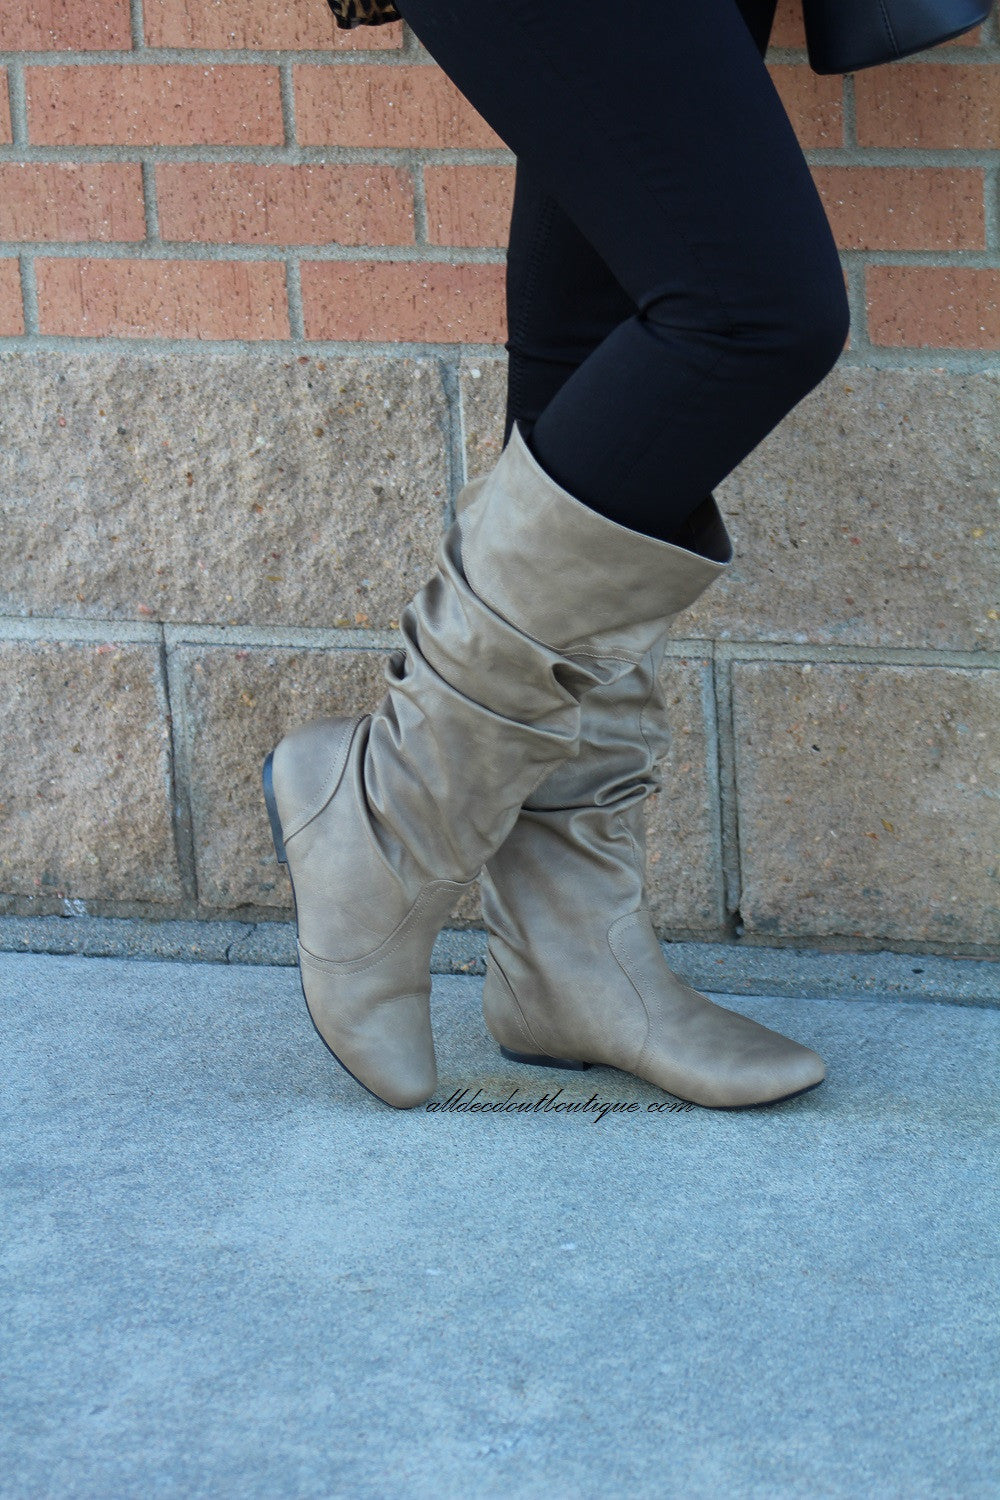 taupe mid calf boots